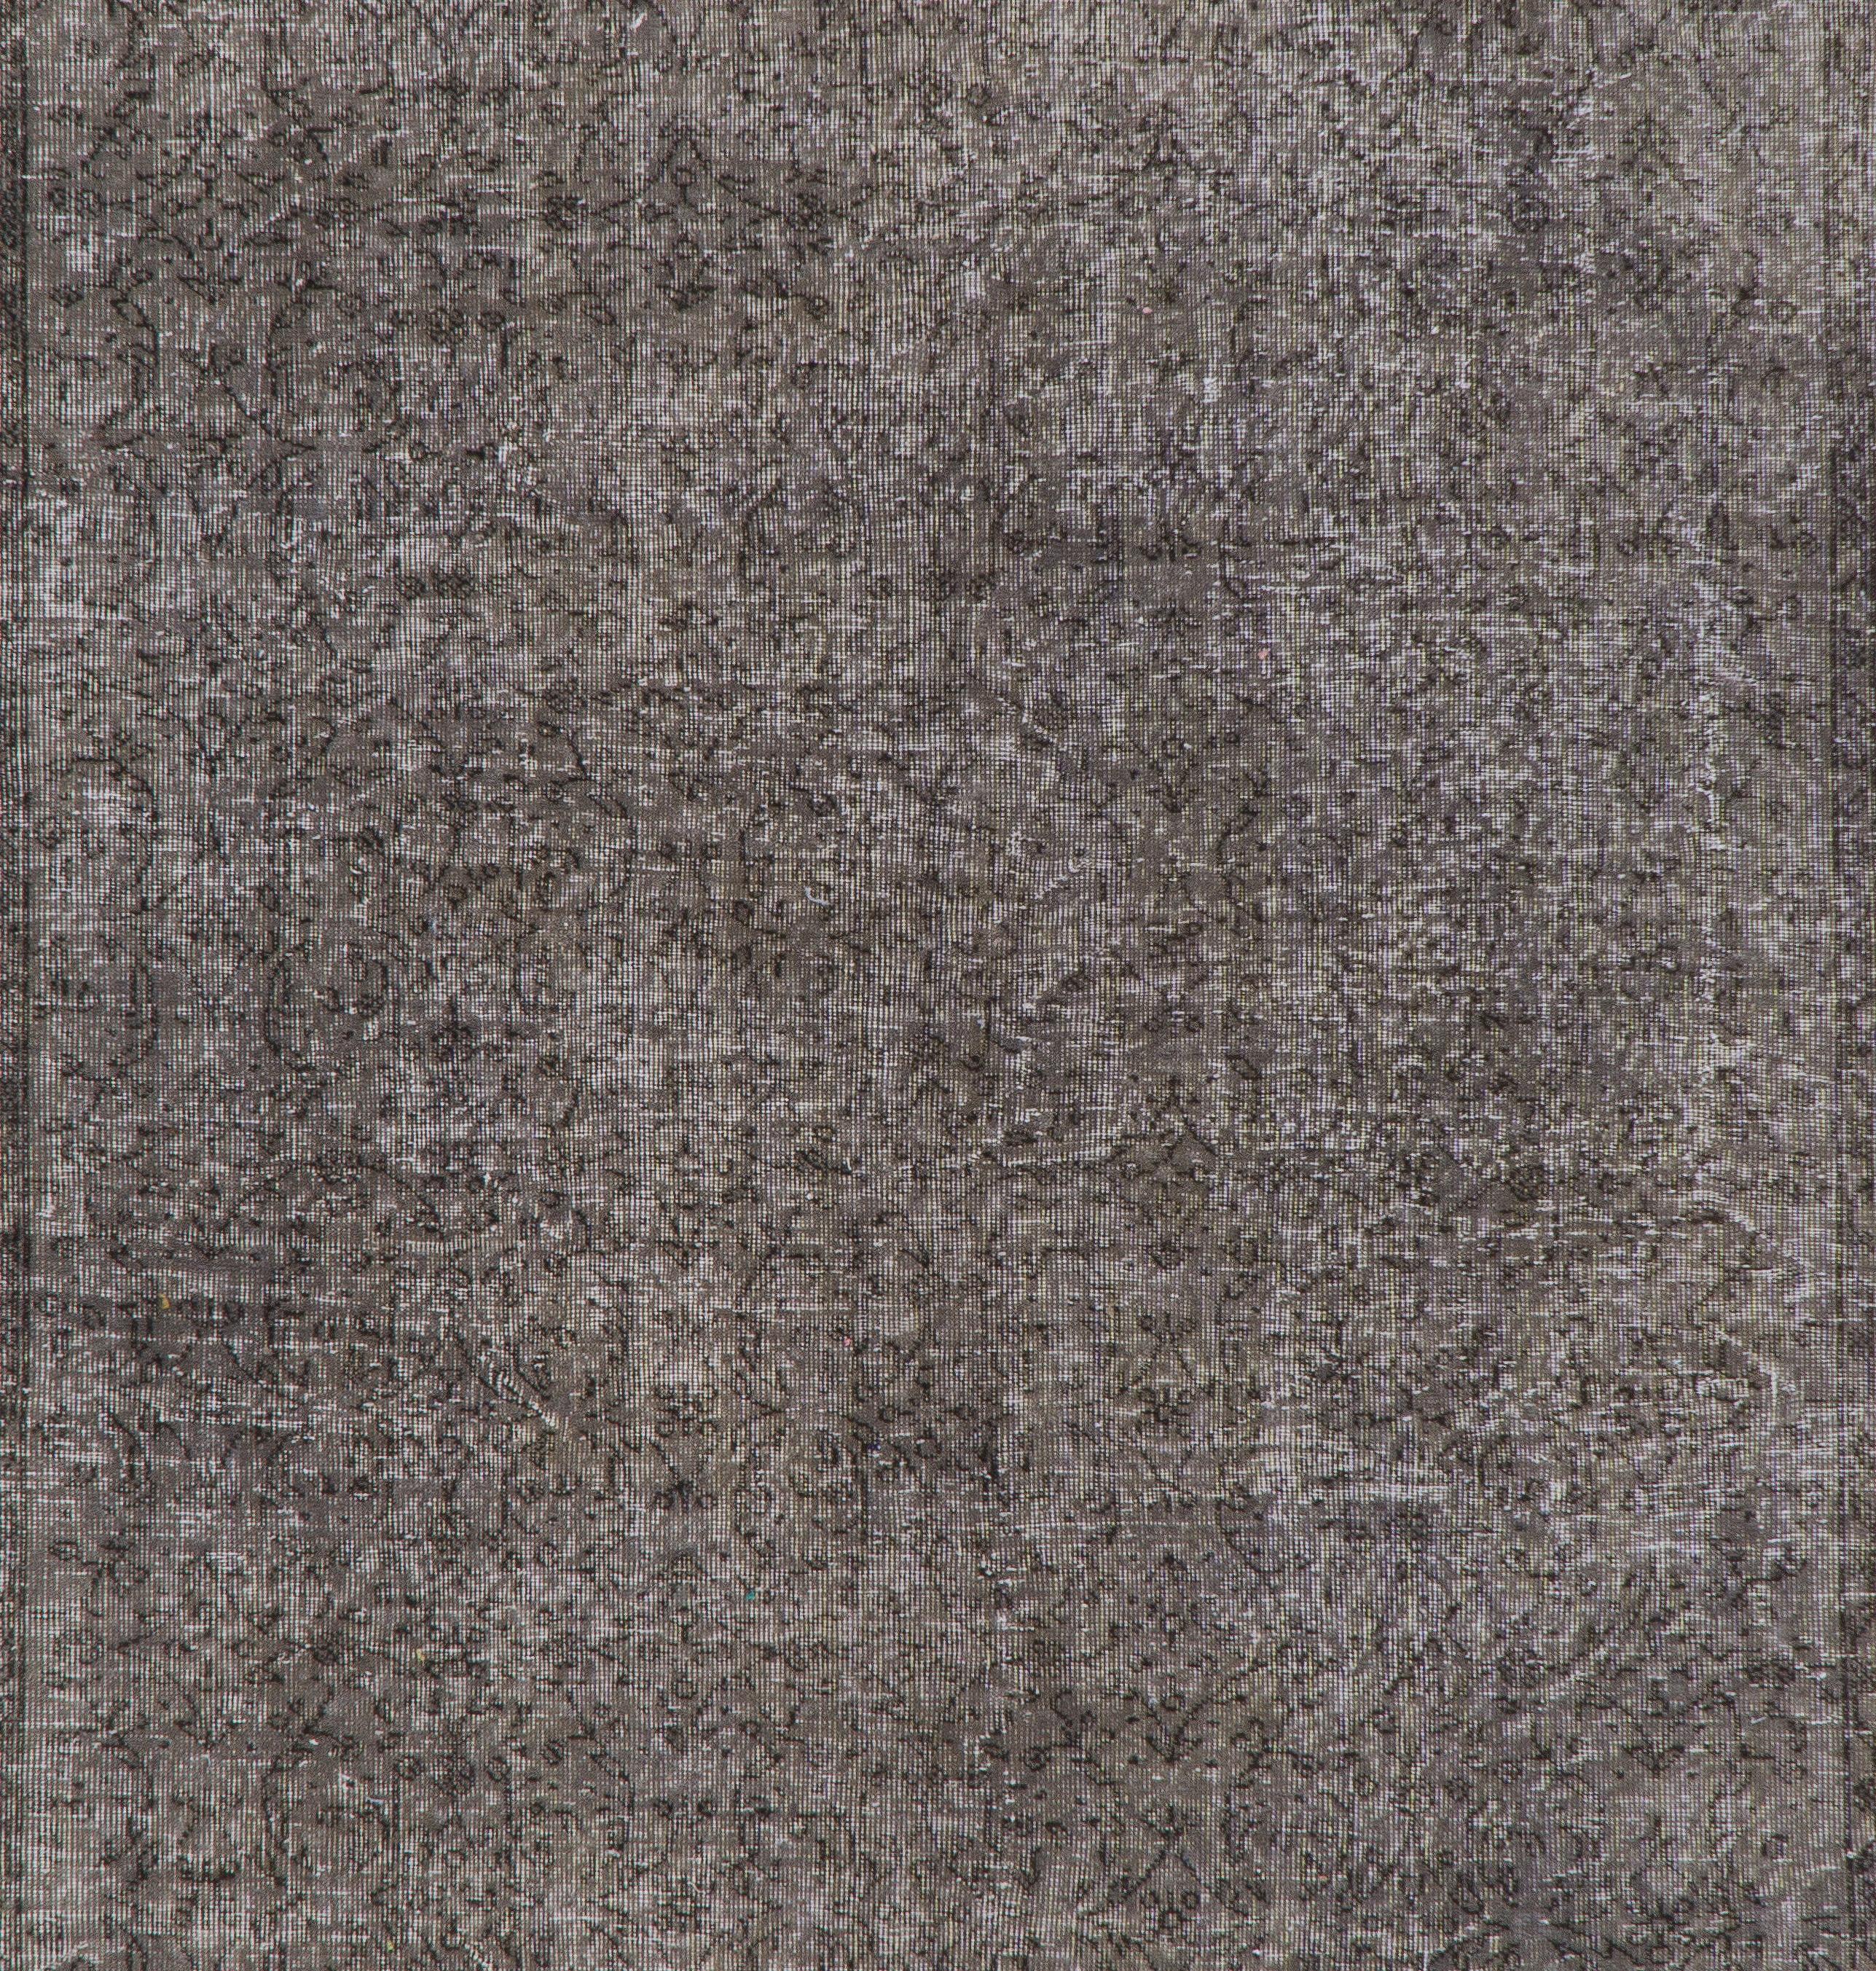 Turkish 7x10.5 Ft Abstract Hand-Knotted Vintage Contemporary Rug Over-Dyed in Gray Color